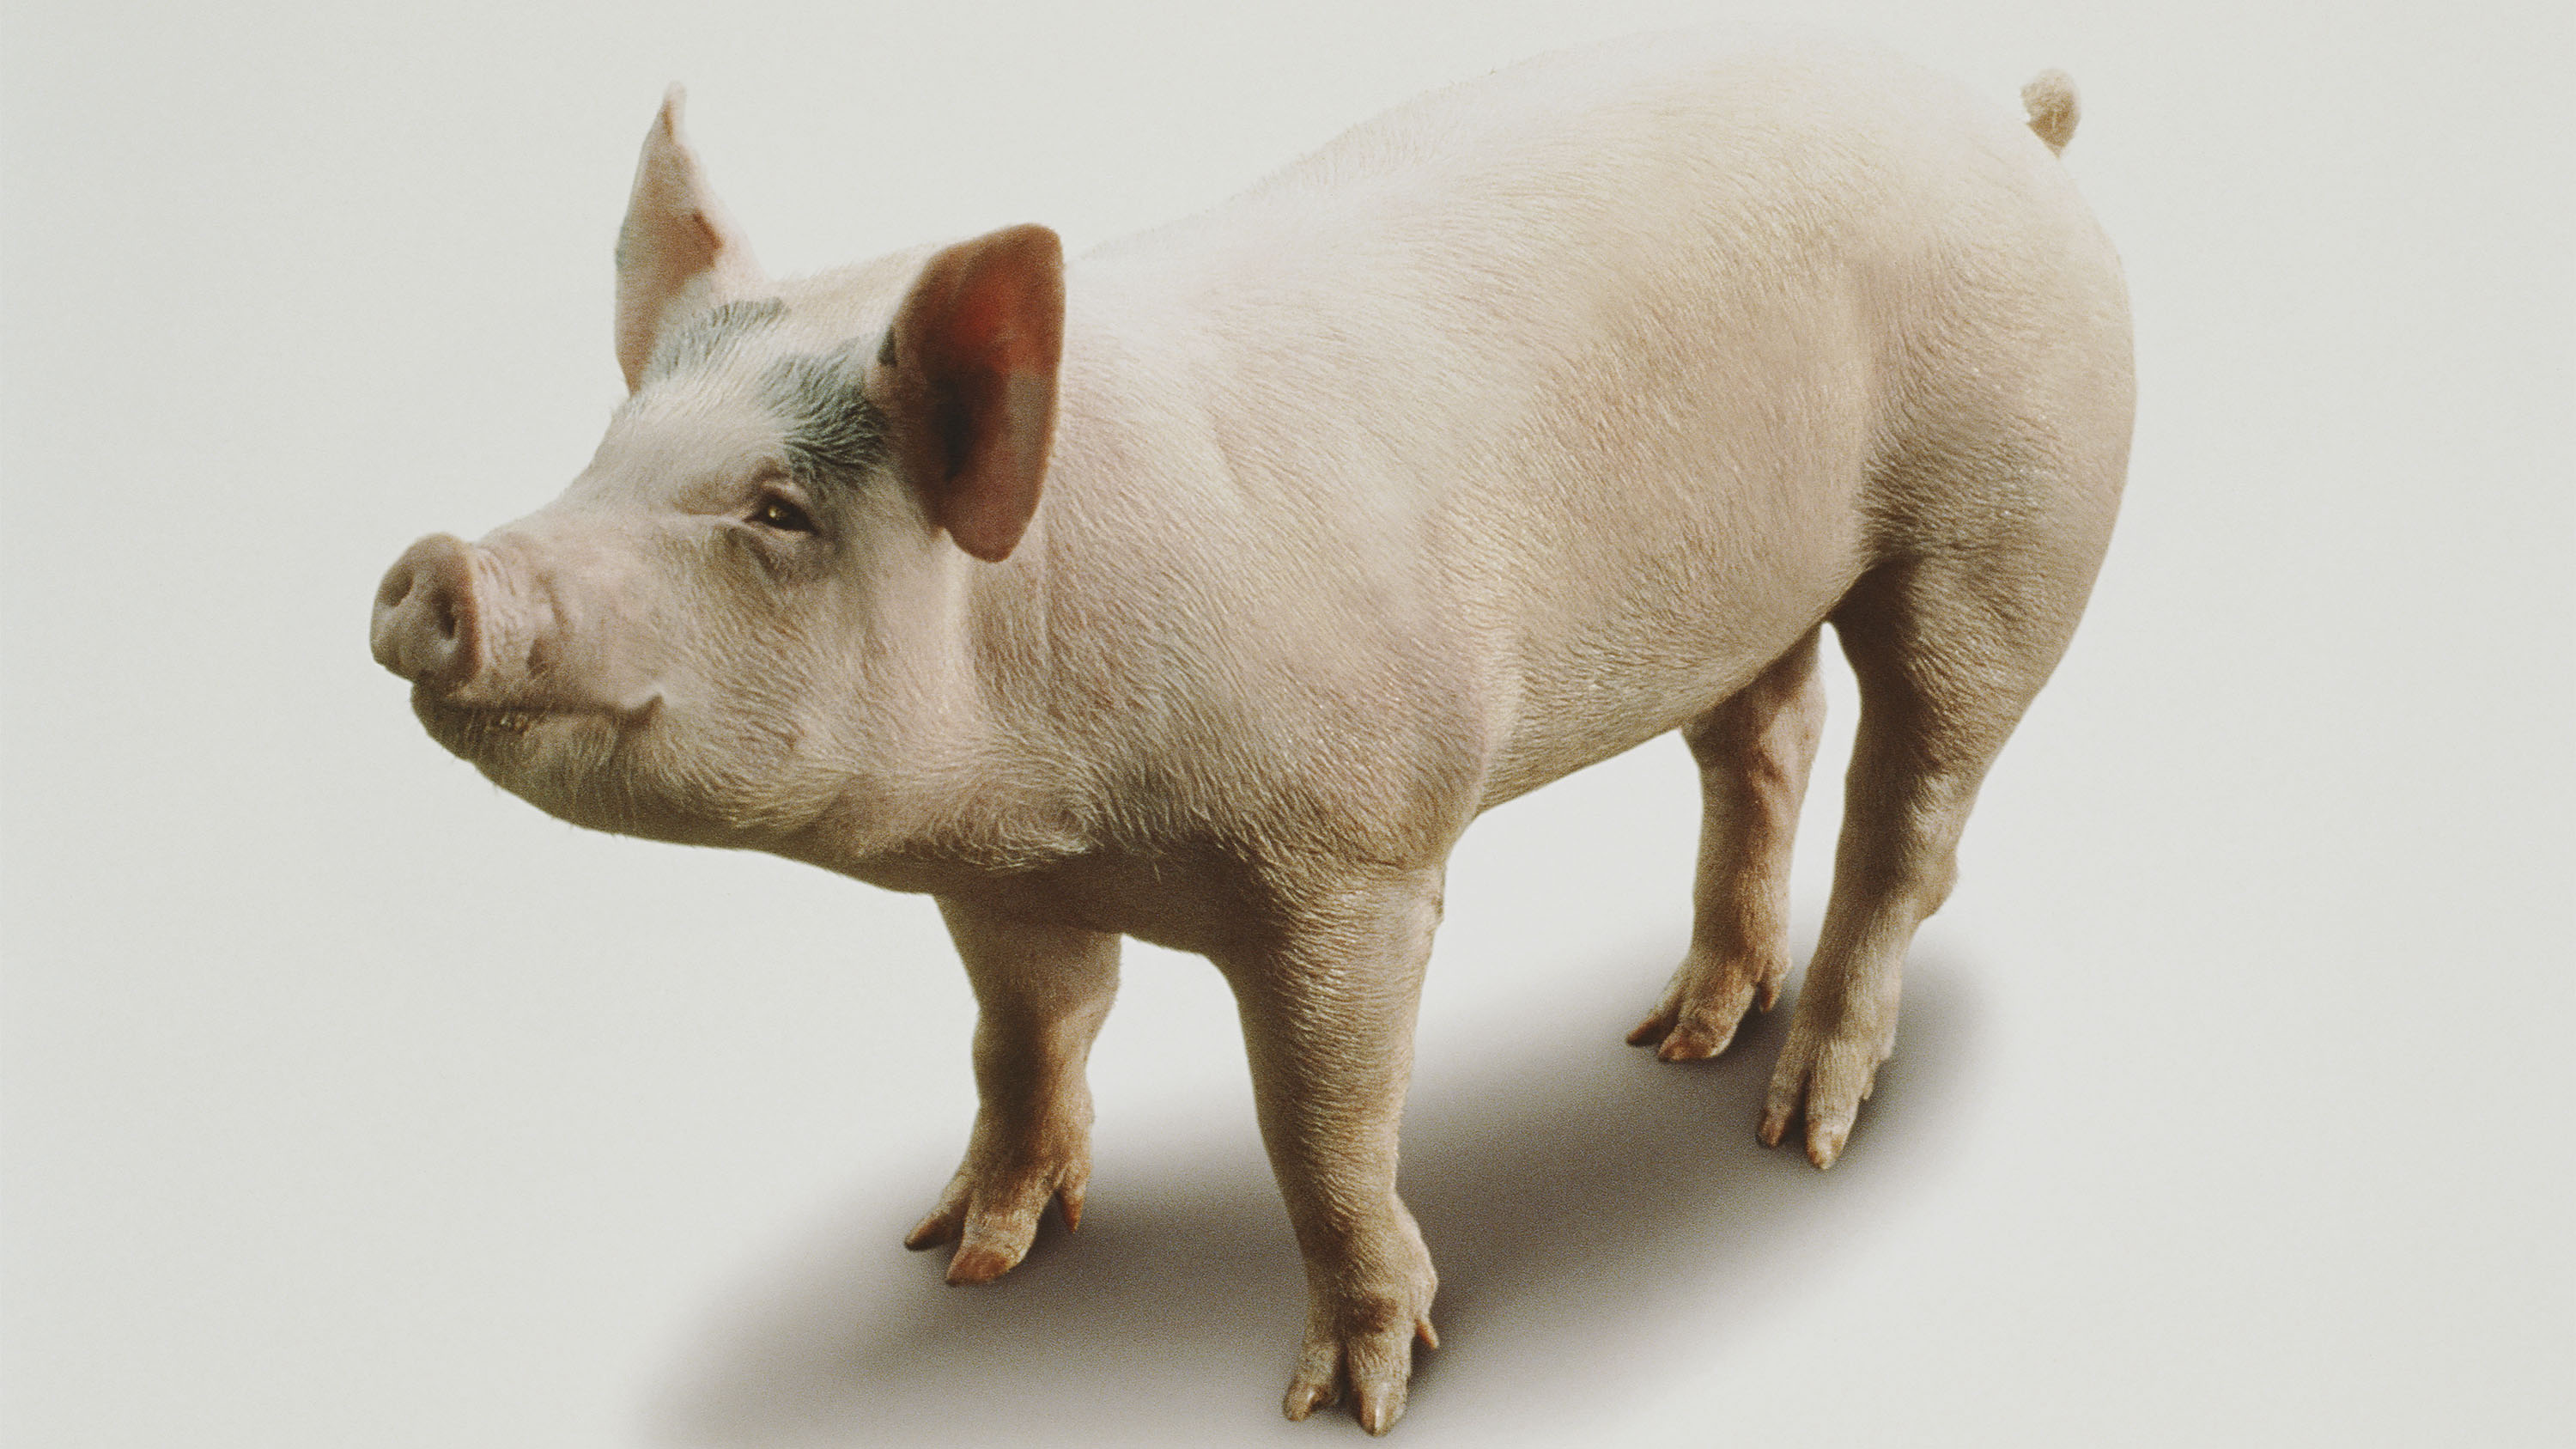 image of a pig on a white background